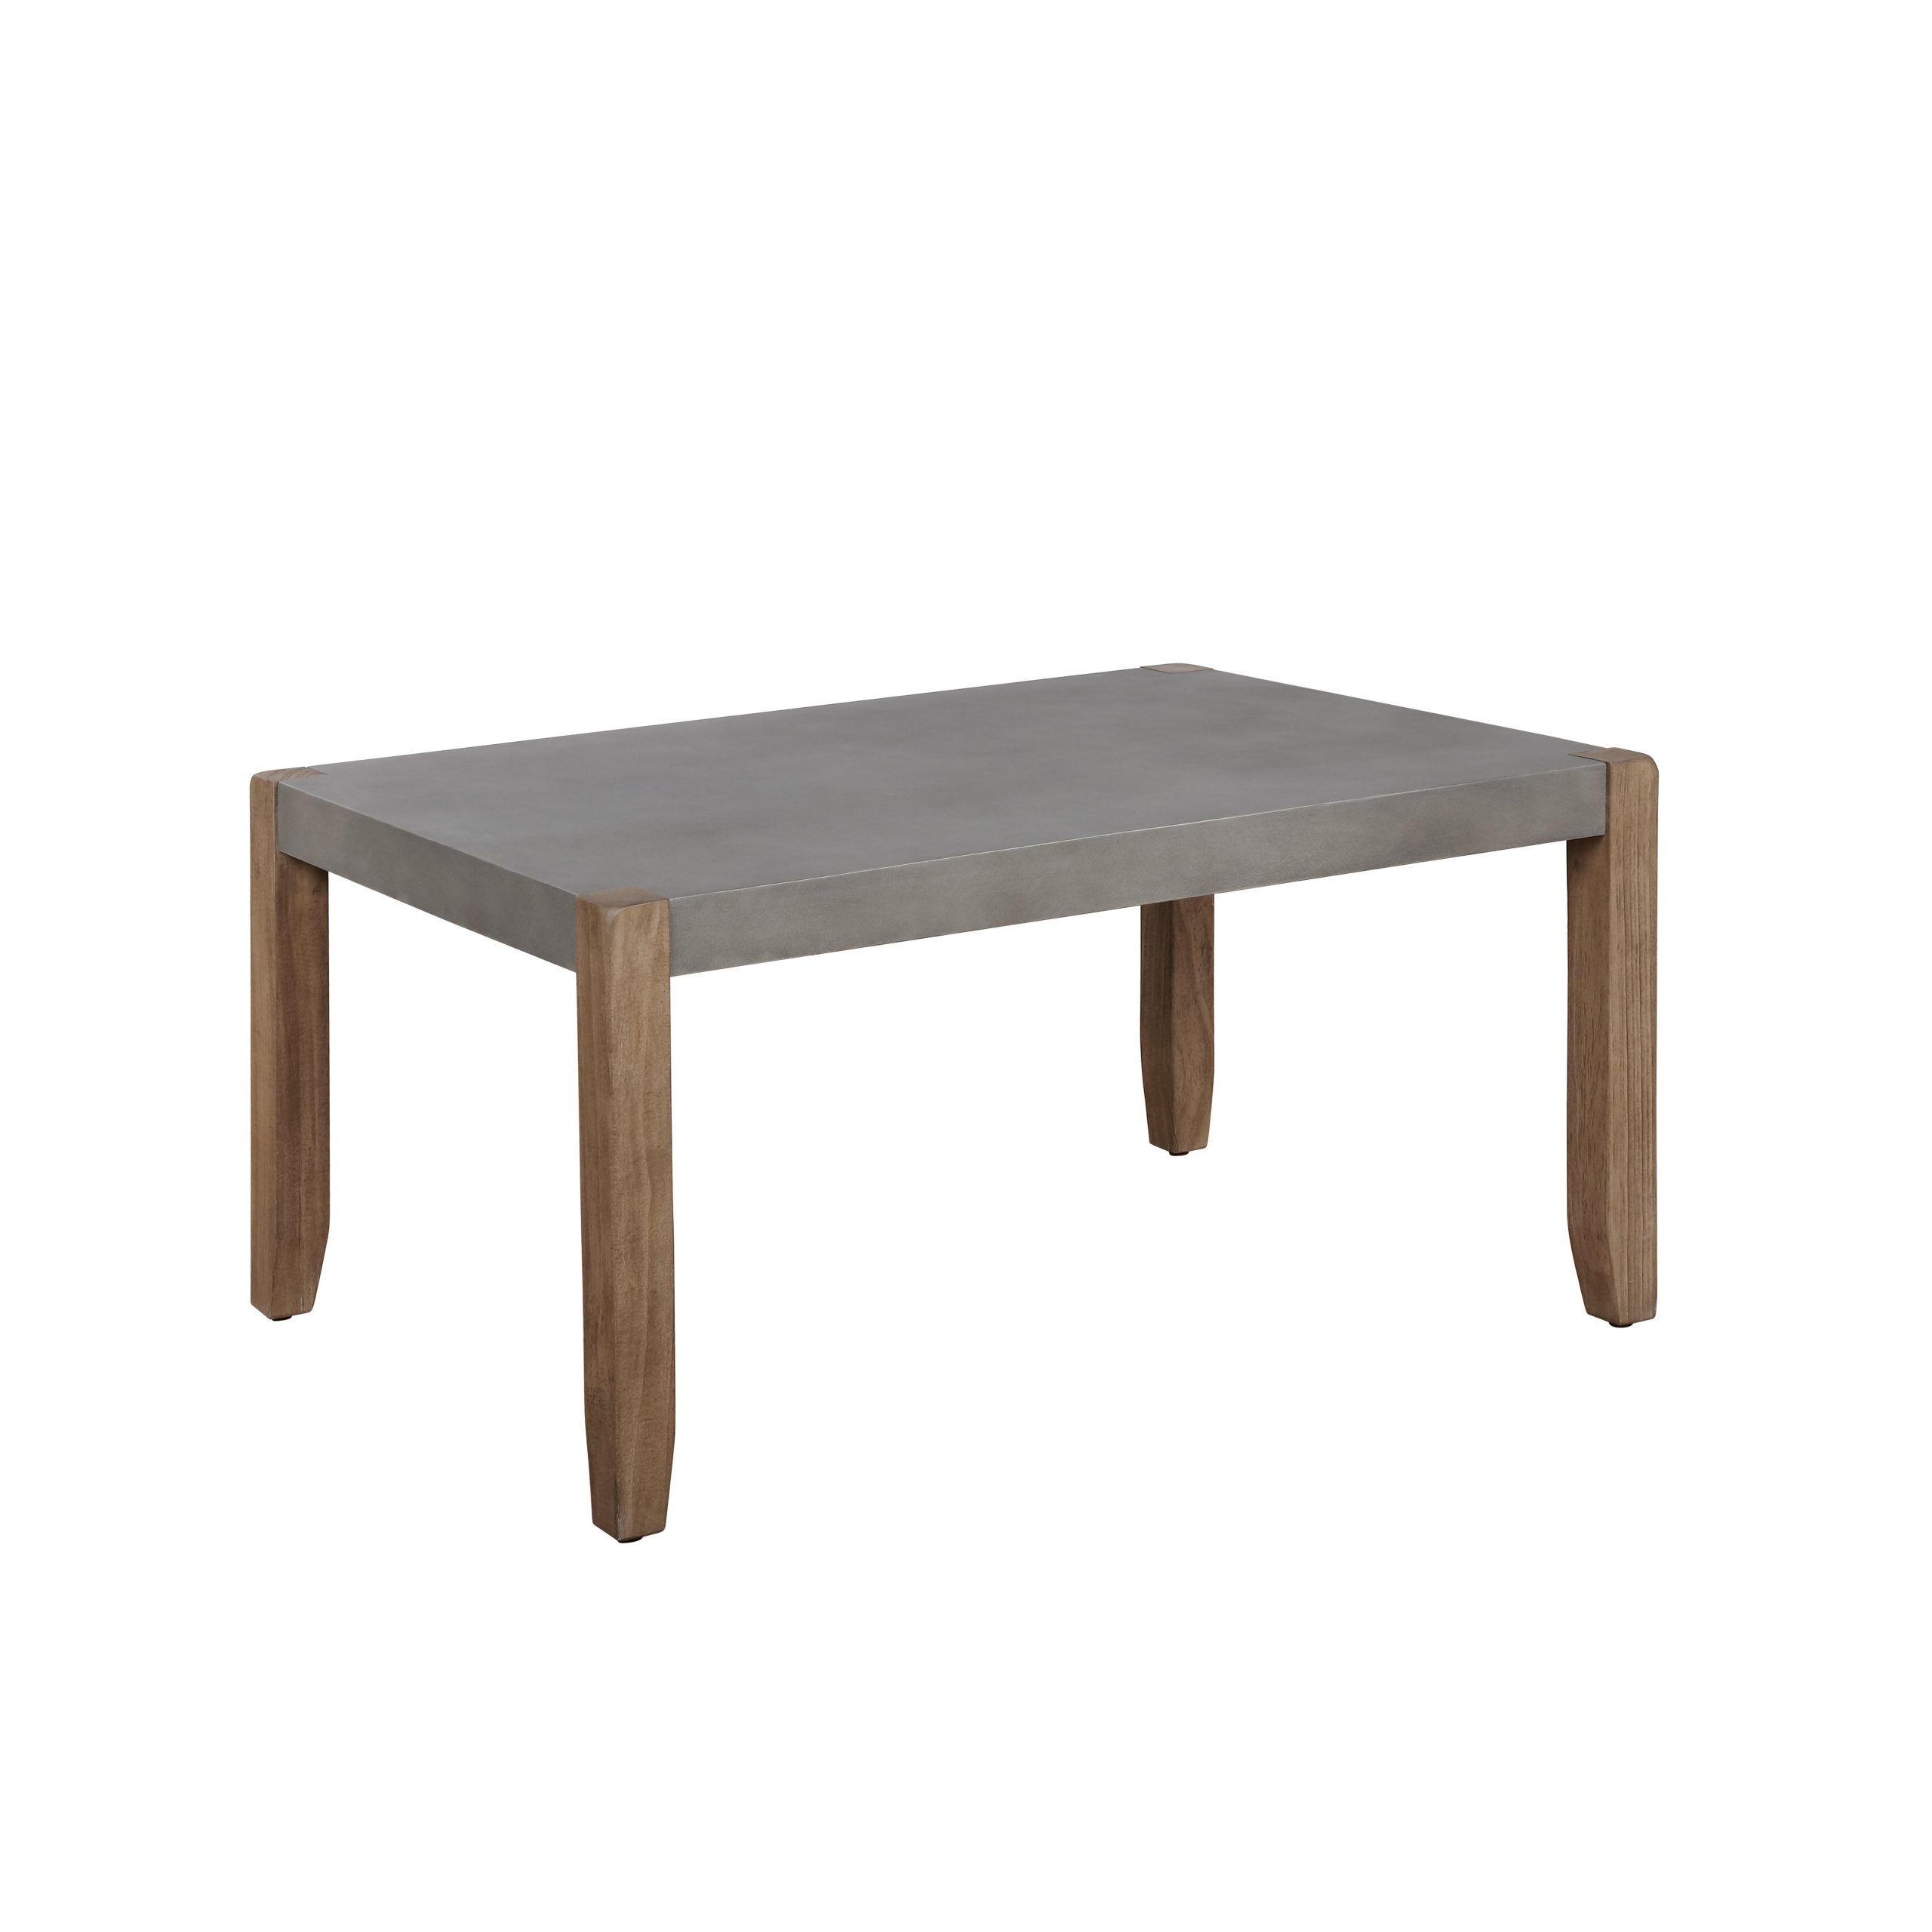 Alaterre Newport 36"l Faux Concrete And Wood Coffee Table – Walmart In Industrial Faux Wood Coffee Tables (View 8 of 20)